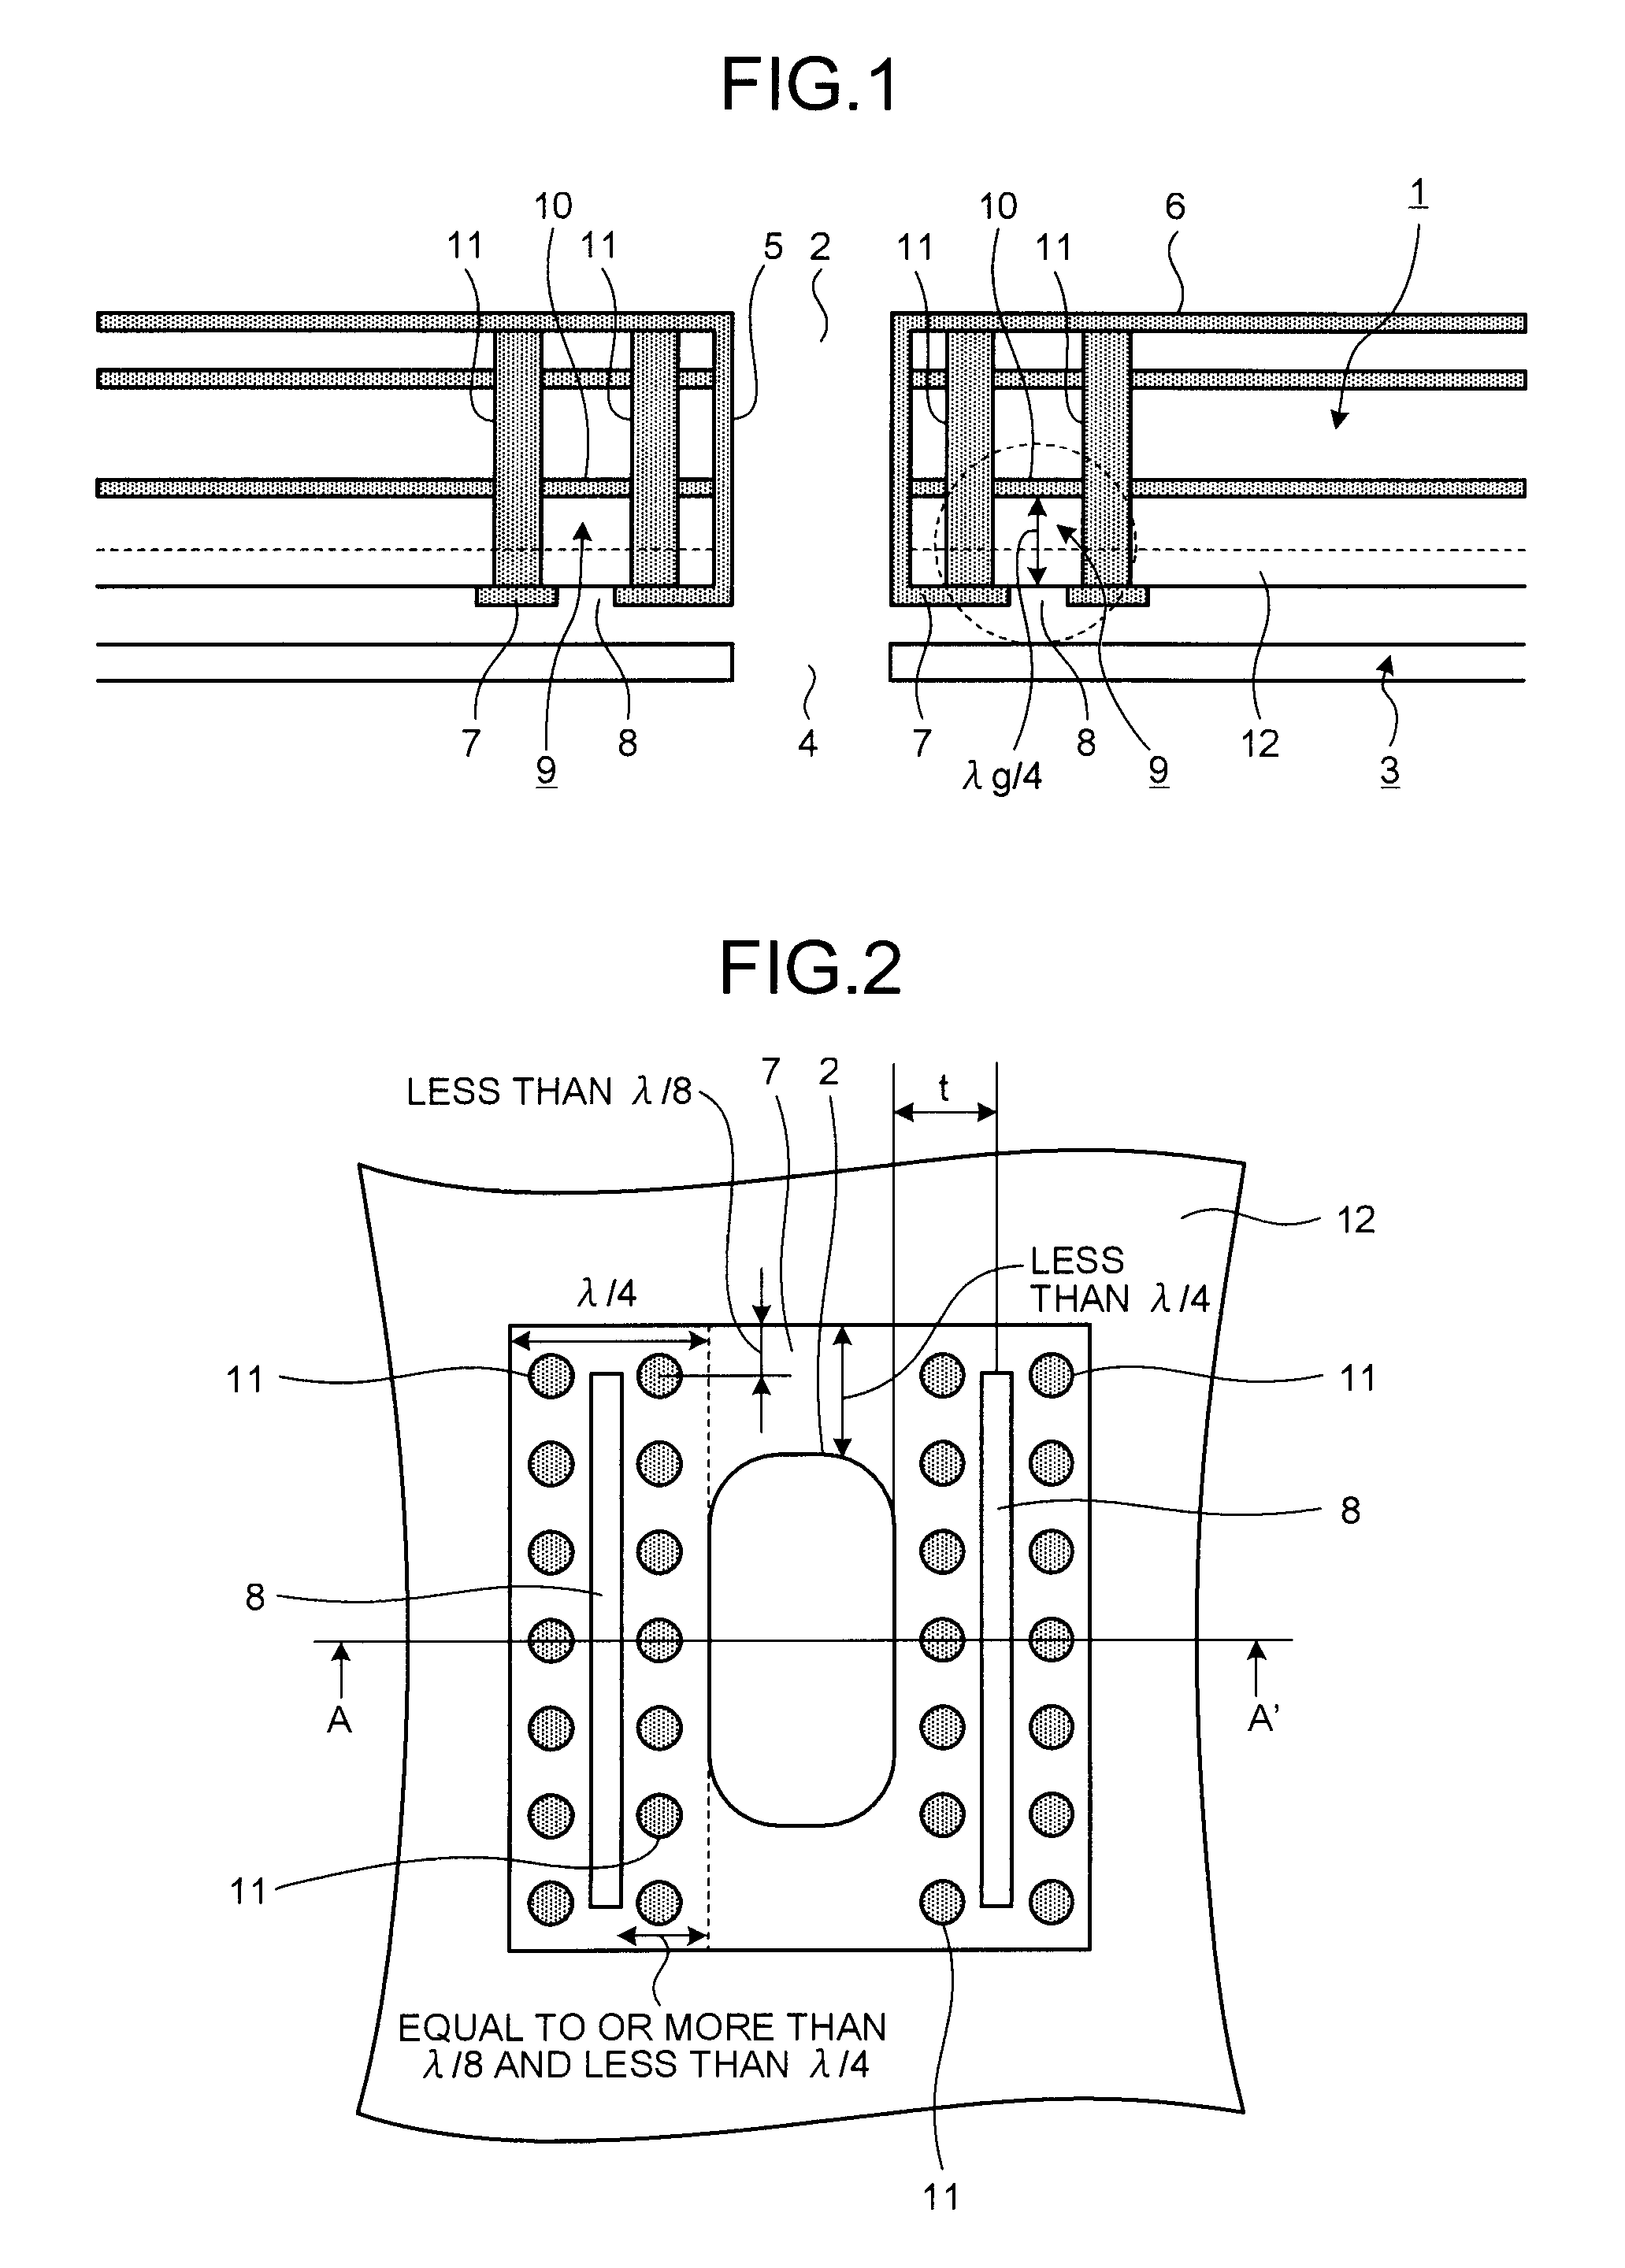 Waveguide connection between a multilayer waveguide substrate and a metal waveguide substrate including a choke structure in the multilayer waveguide